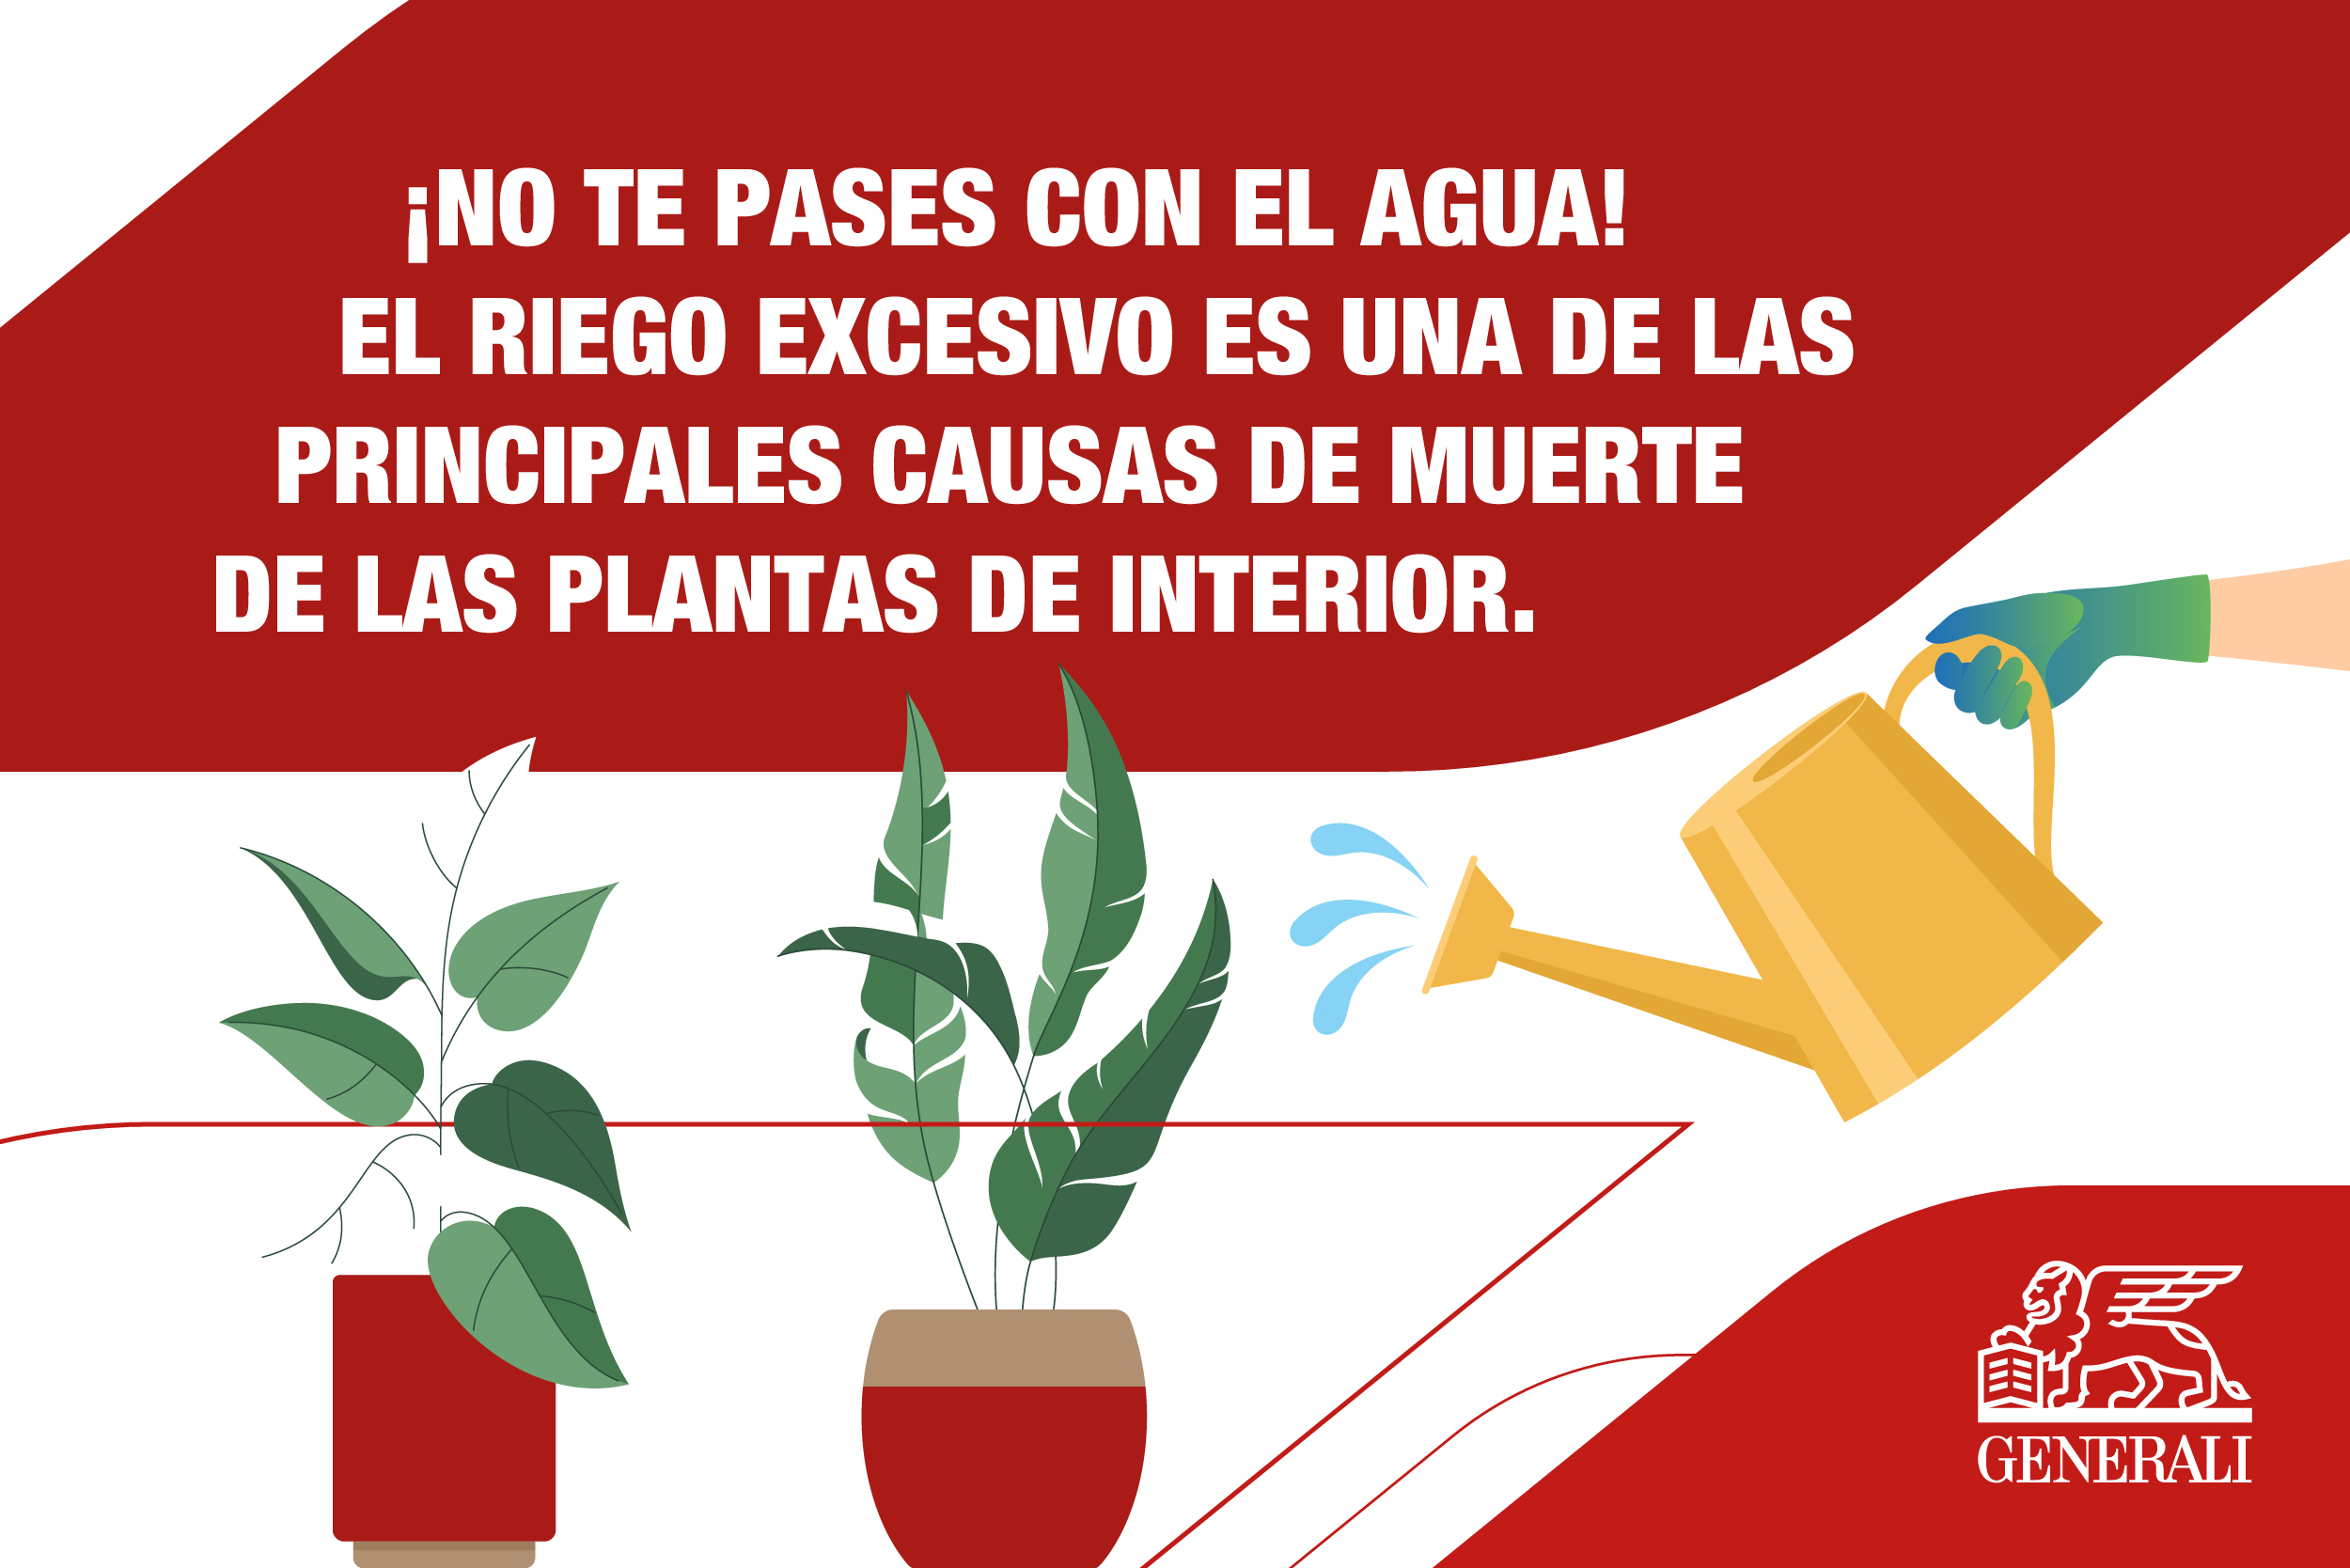 1634747_1634747_Copy-of-Generali-Spain-mini-graphics-x-4-caring-for-house-plants-01_050823 (1).jpg